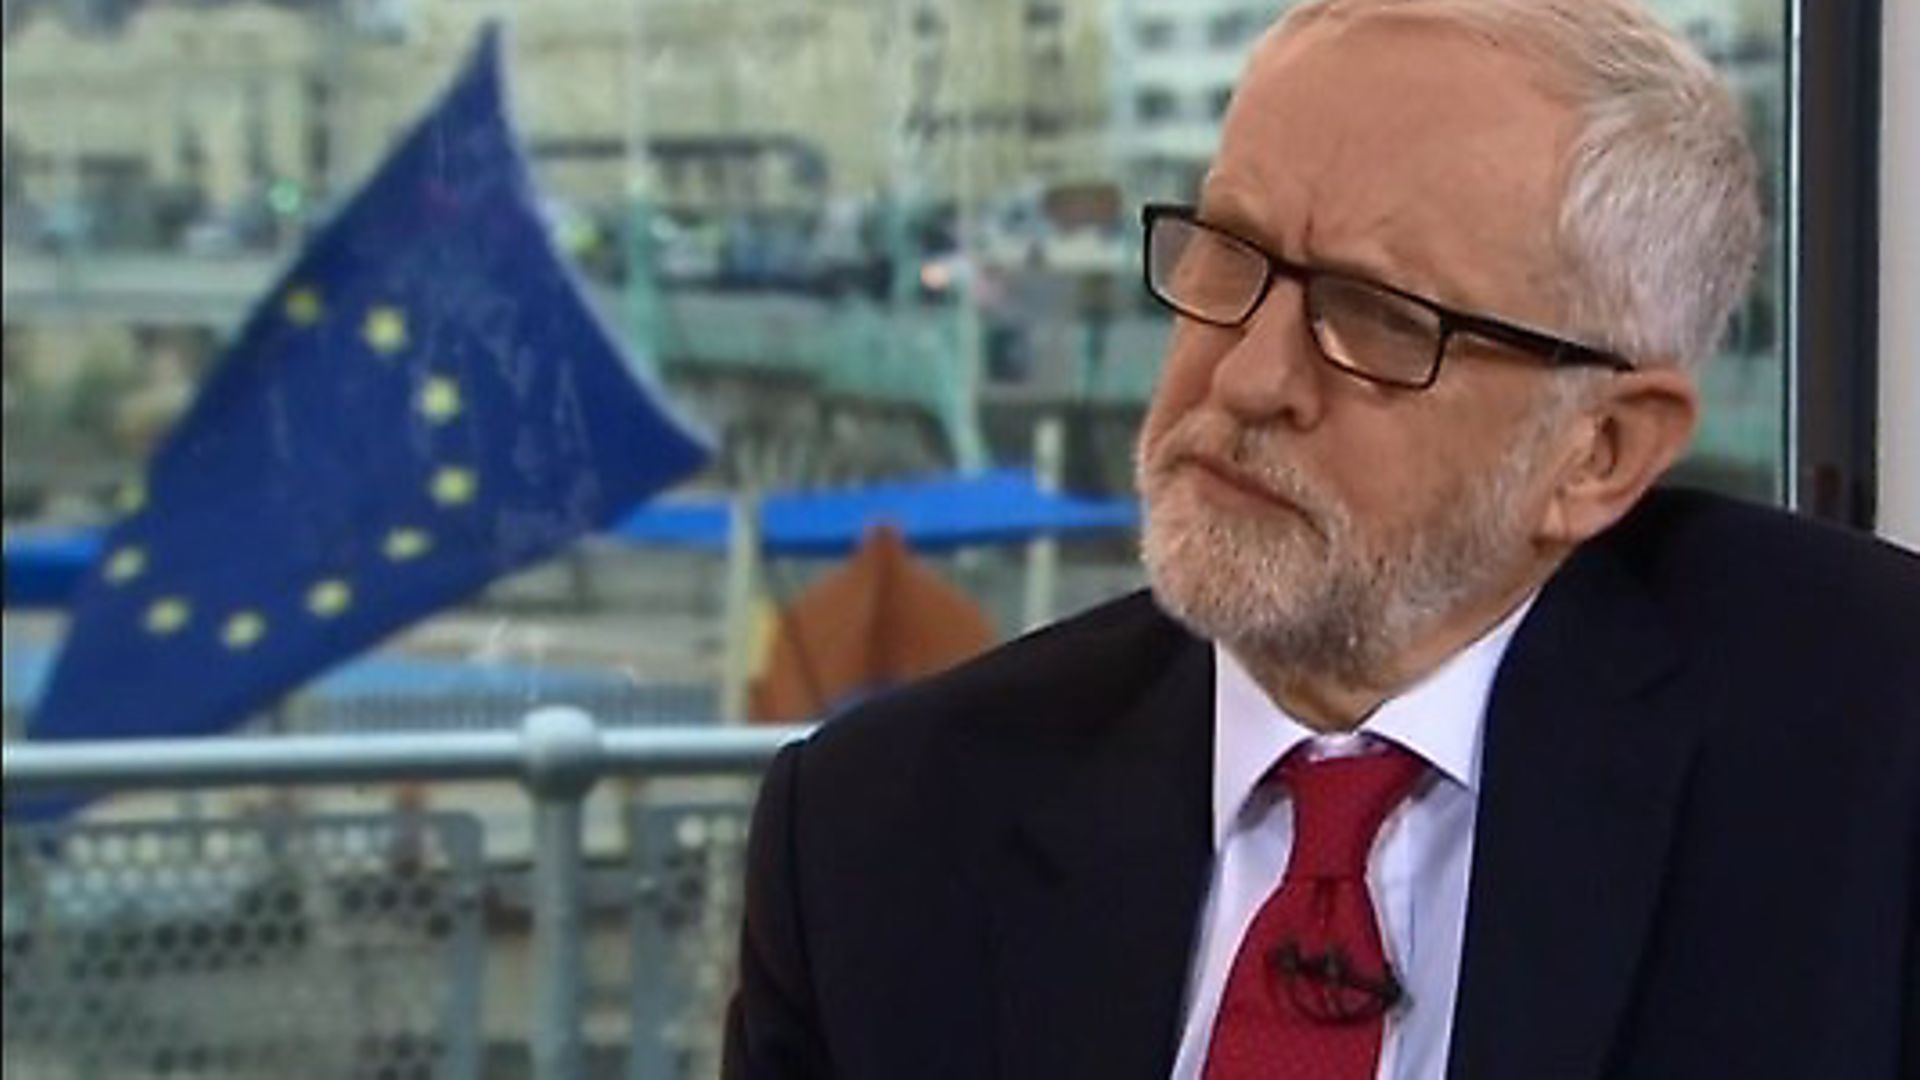 Jeremy Corbyn speaking to Andrew Marr. Picture: BBC - Credit: Archant